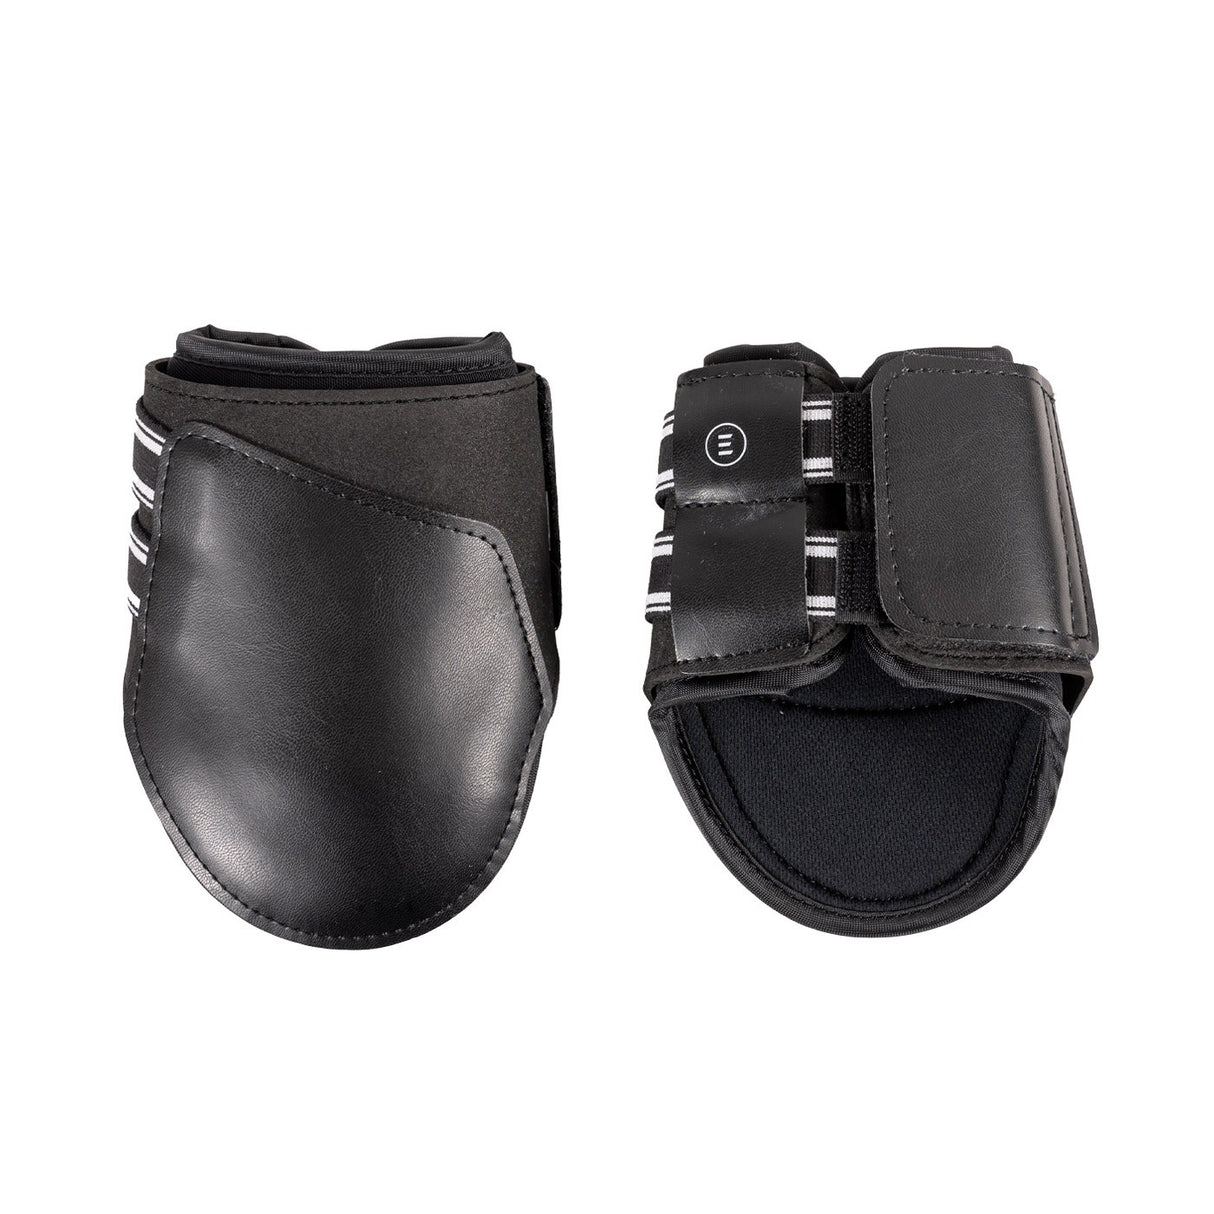 EquiFit Essential The Original Hind Boots